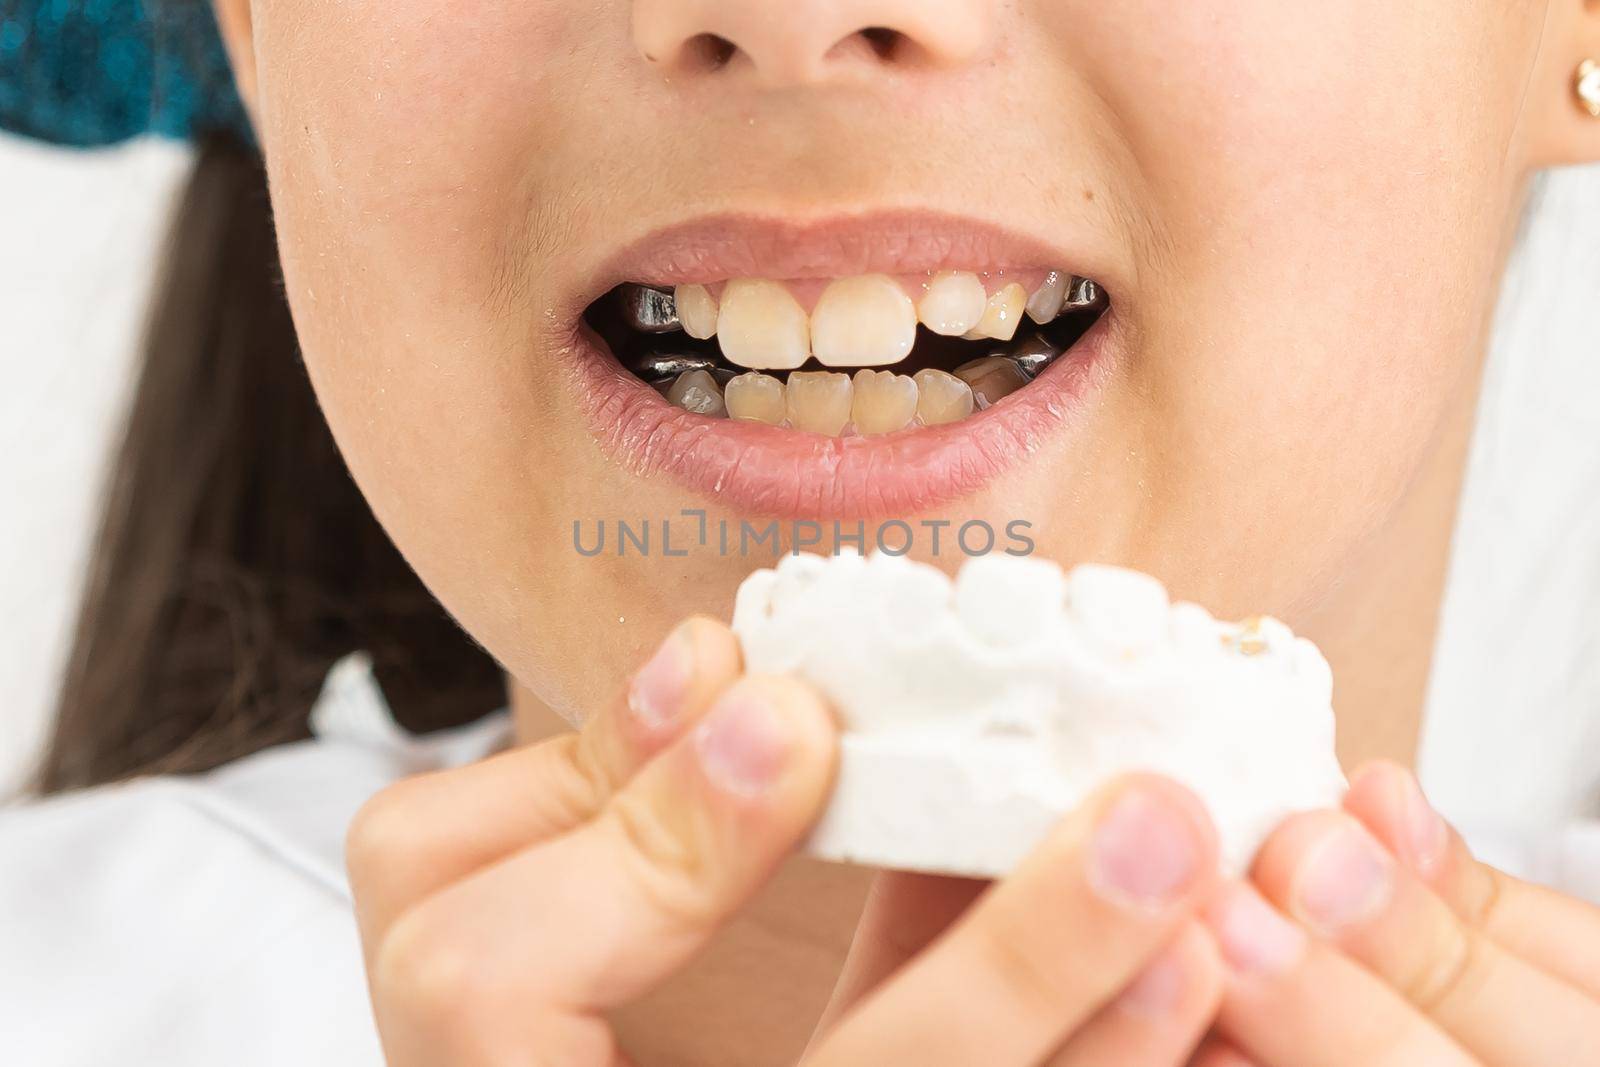 Teenager is holding a dental cast model at the start of orthodontic treatment alongside her teeth after the treatment was completed